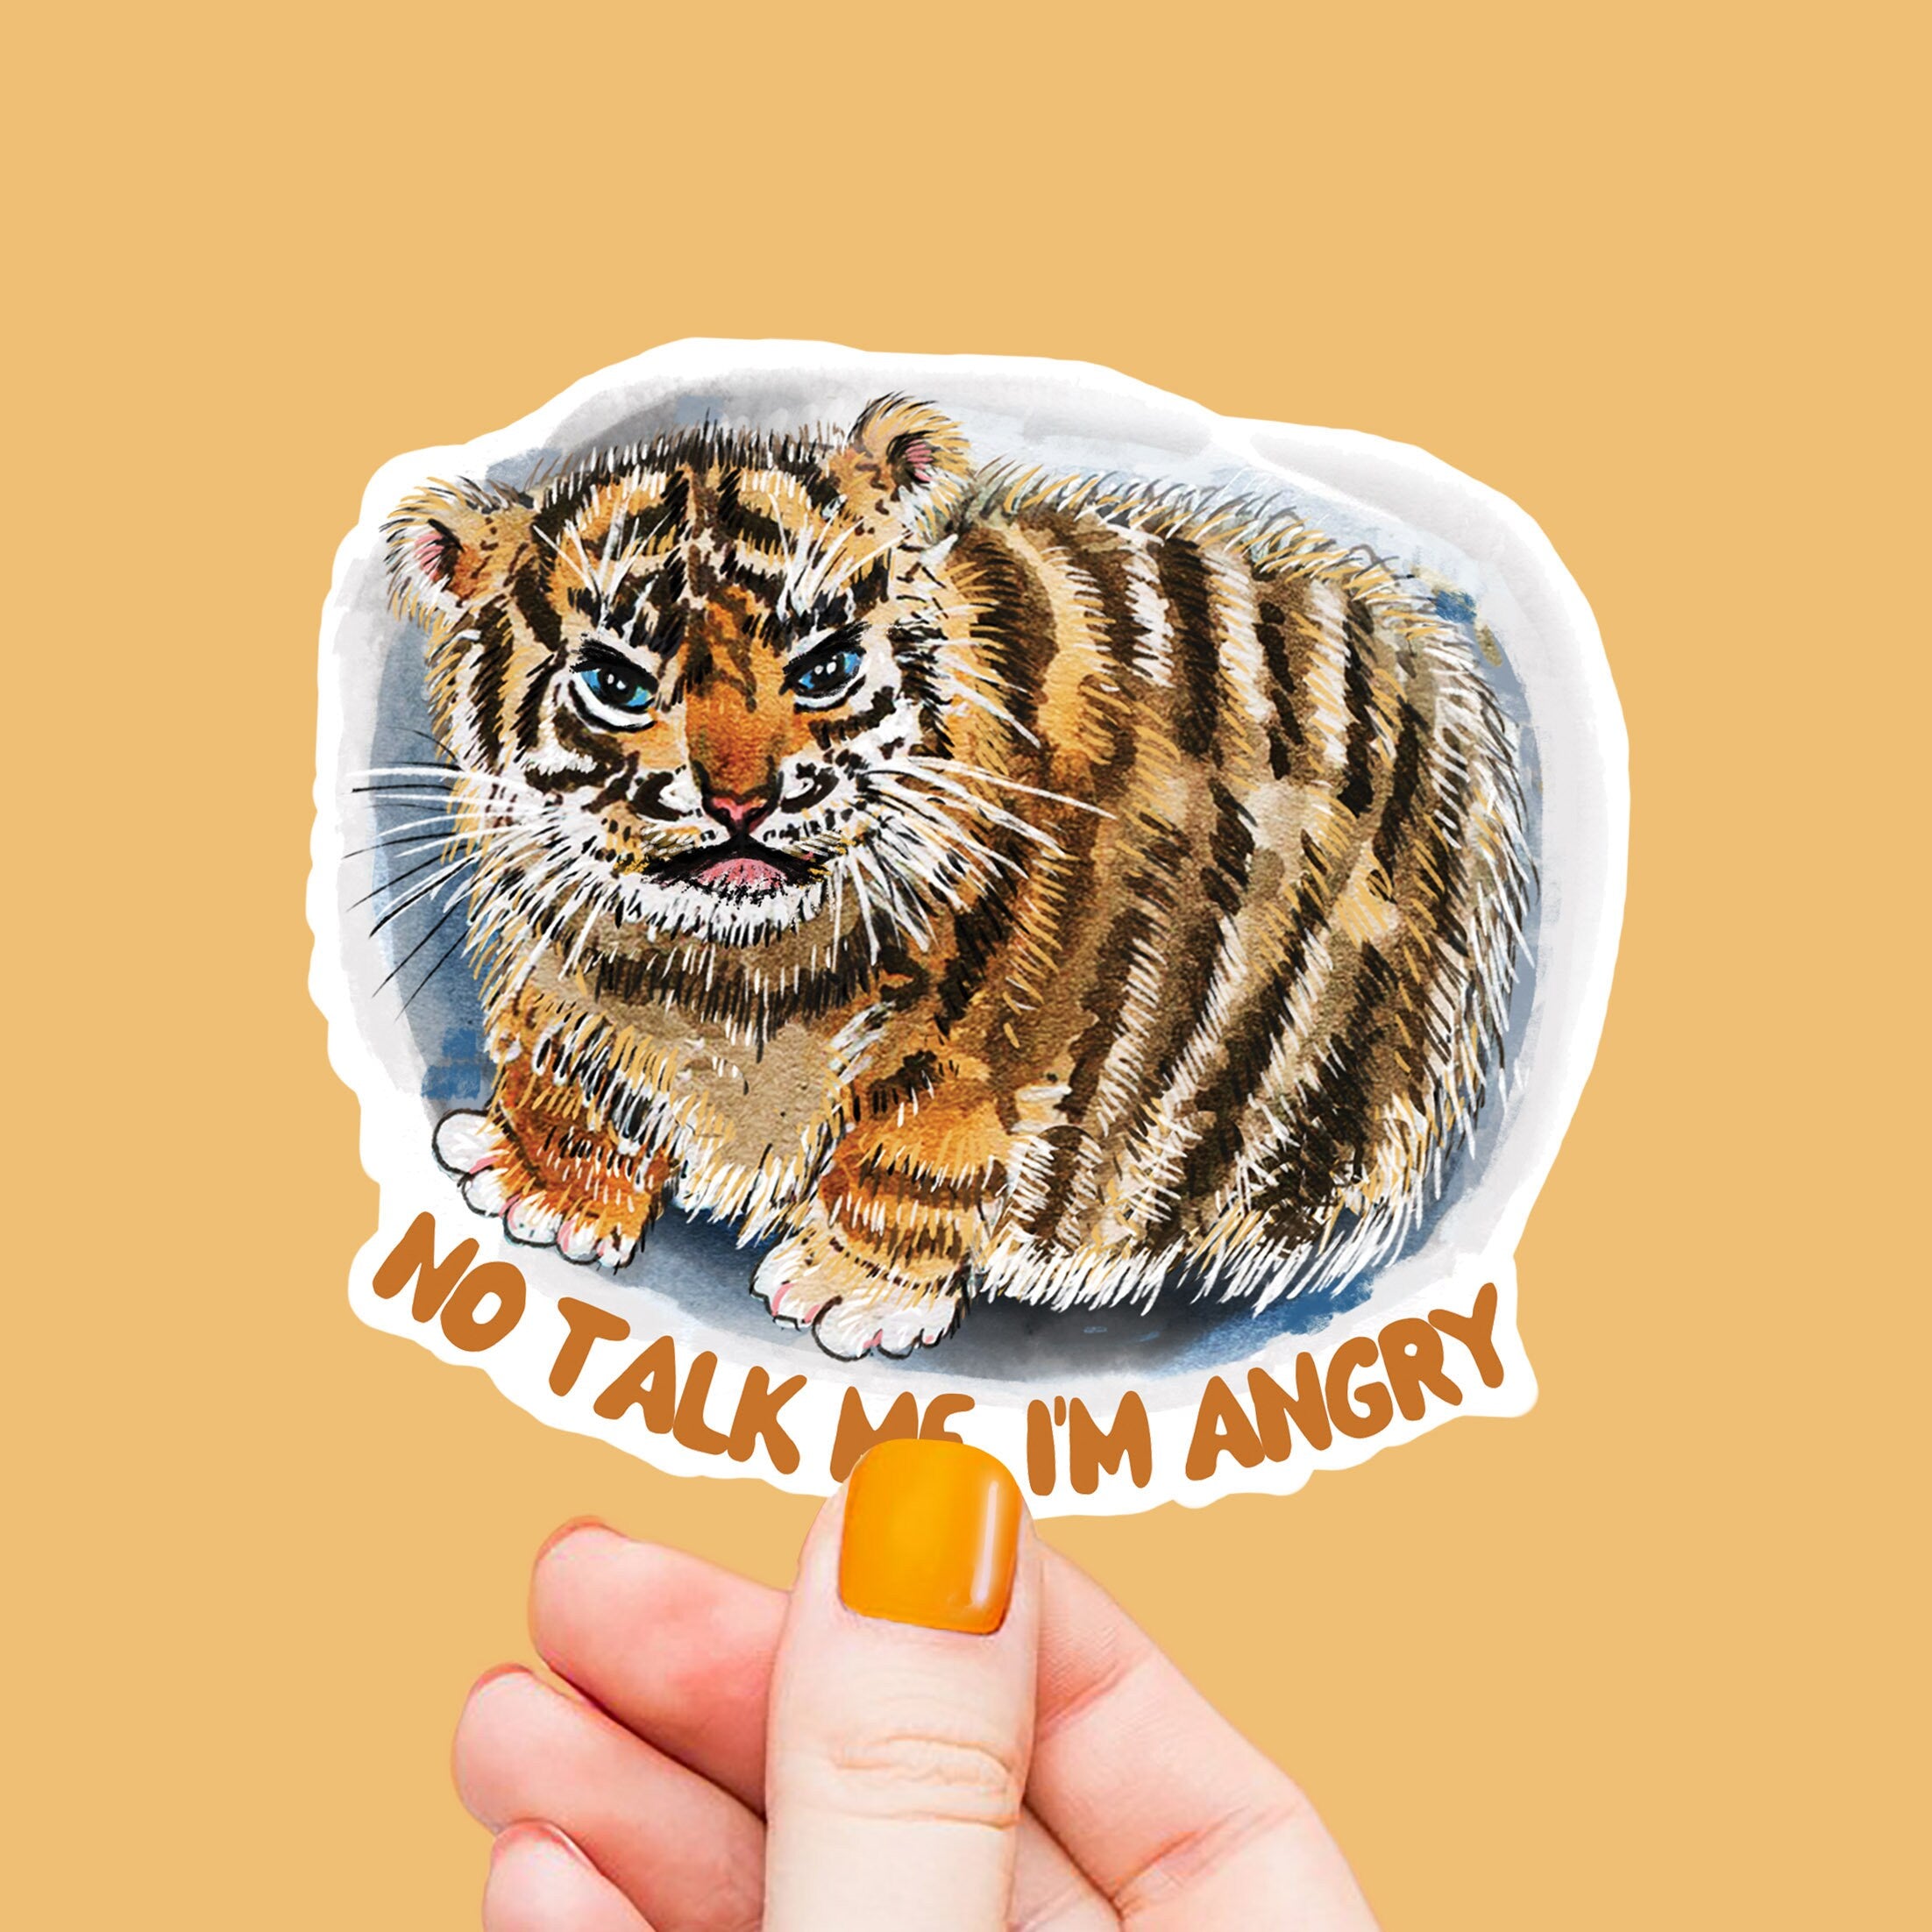 angry tiger photos